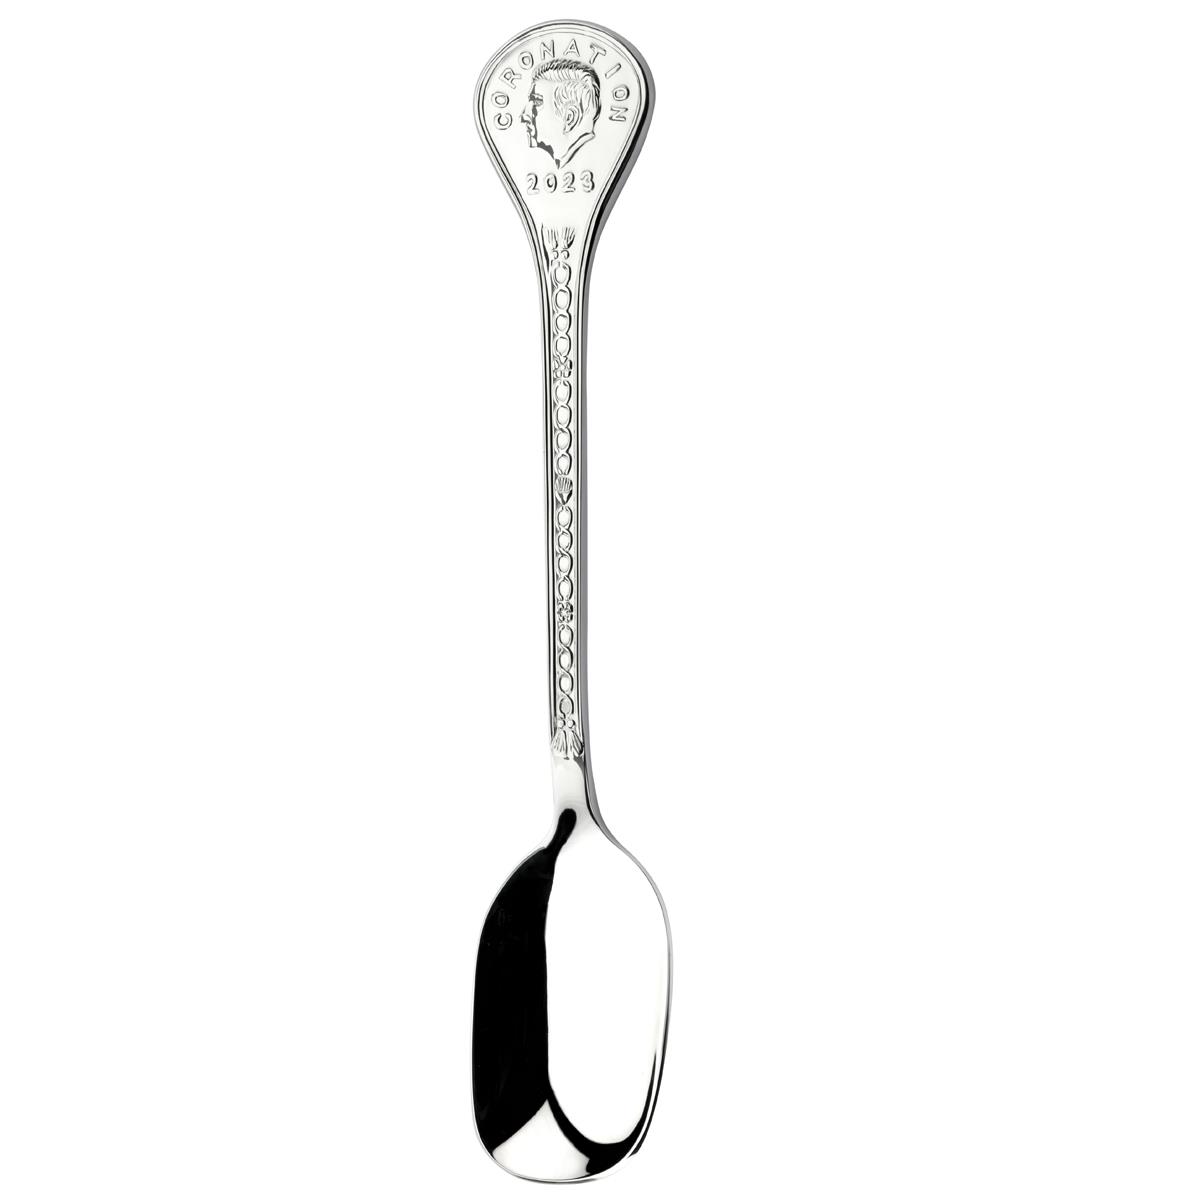 What characteristics does the Arthur Price King Charles III coronation spoon 2023 possess?